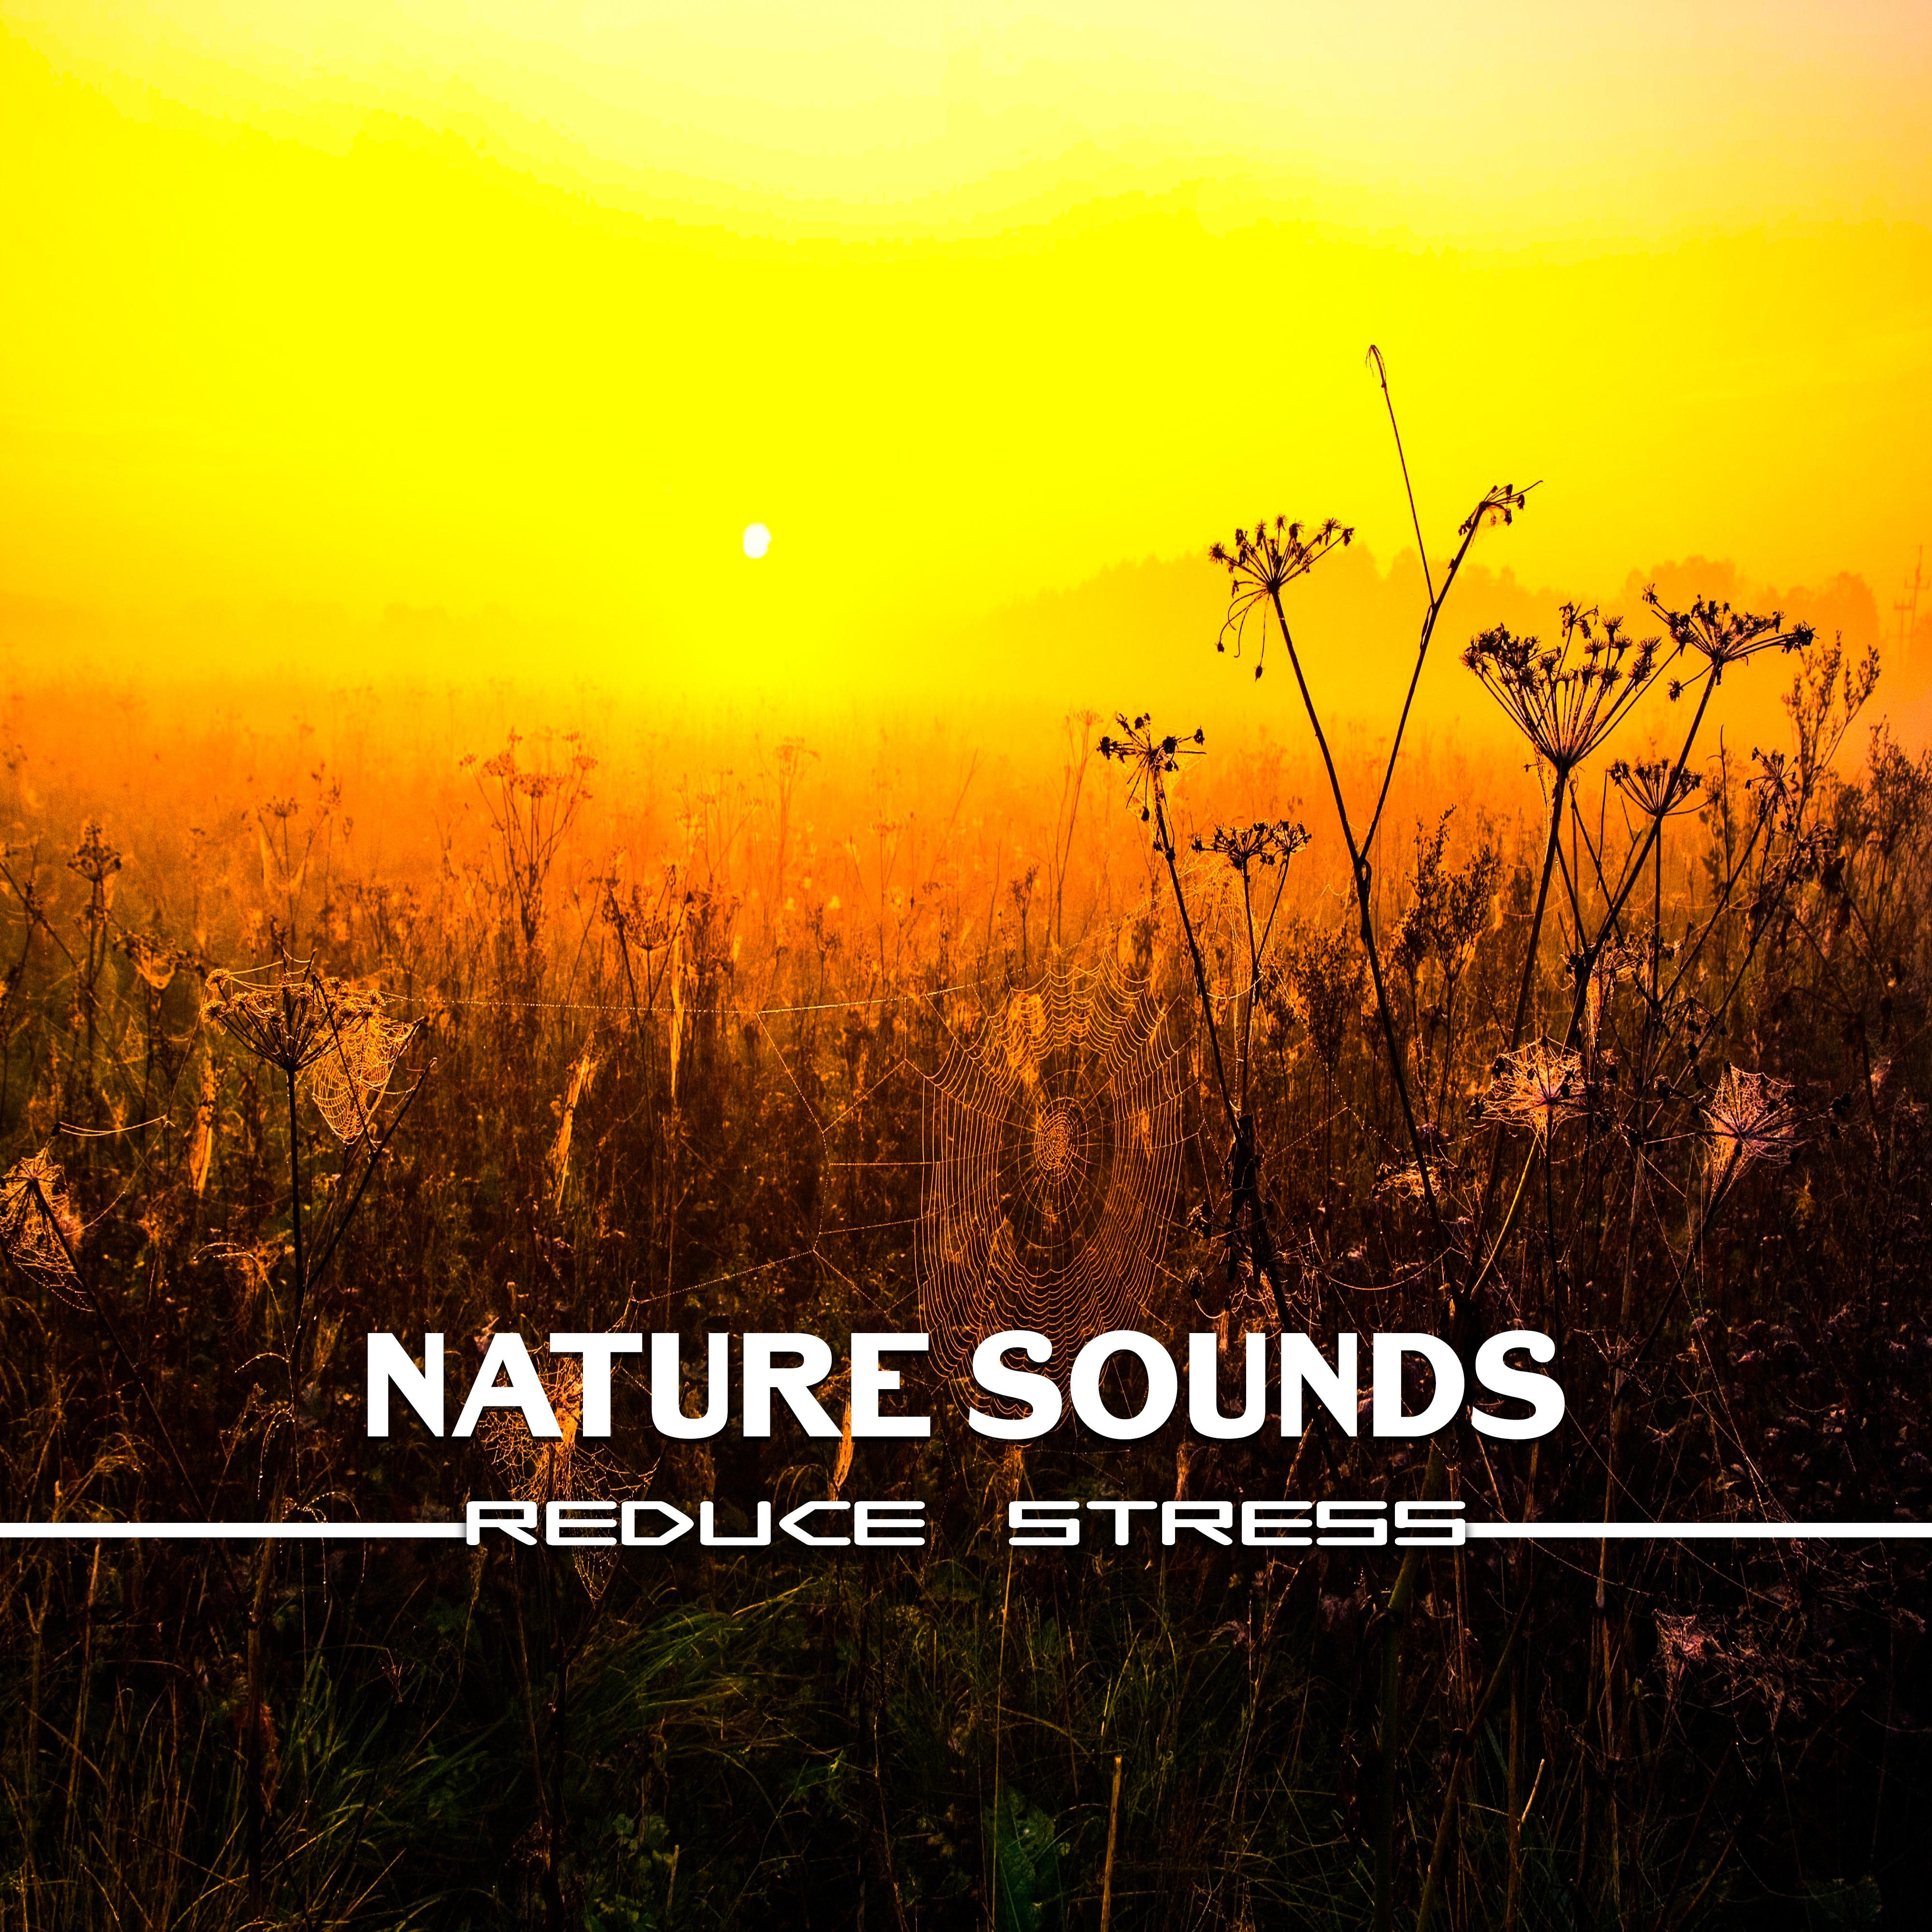 Nature Sounds Reduce Stress  Inner Healing, Tranquility, Soft Music to Calm Down, Relaxation, Stress Relief, Peaceful Mind